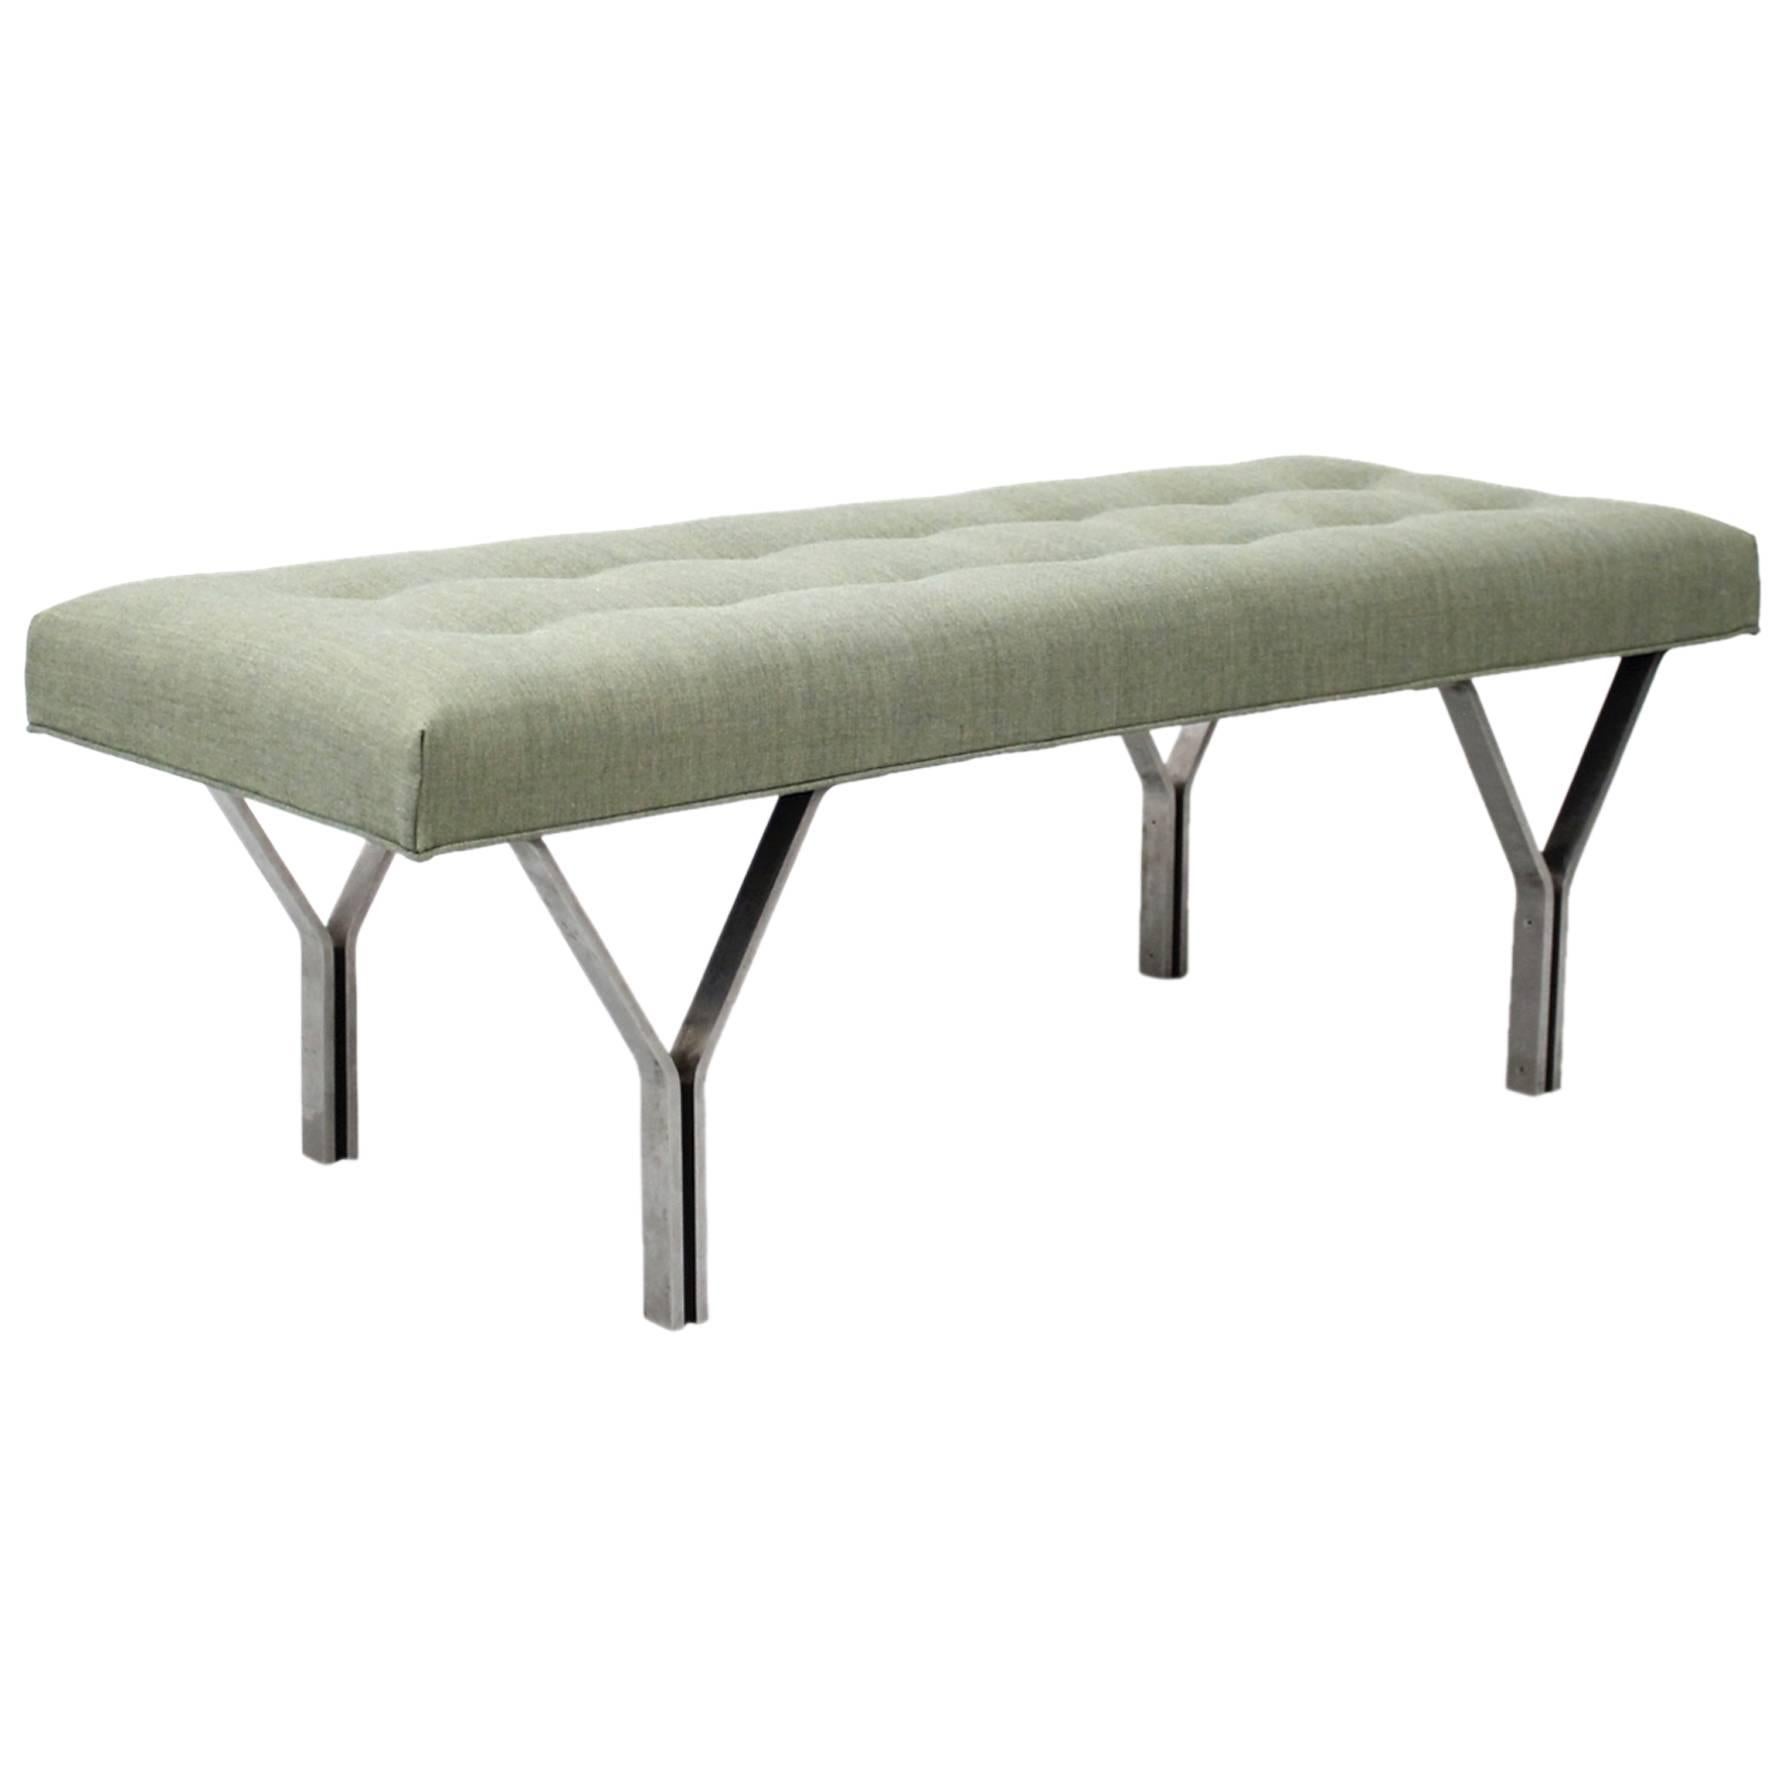 Architectural Upholstered Bench by Cumberland